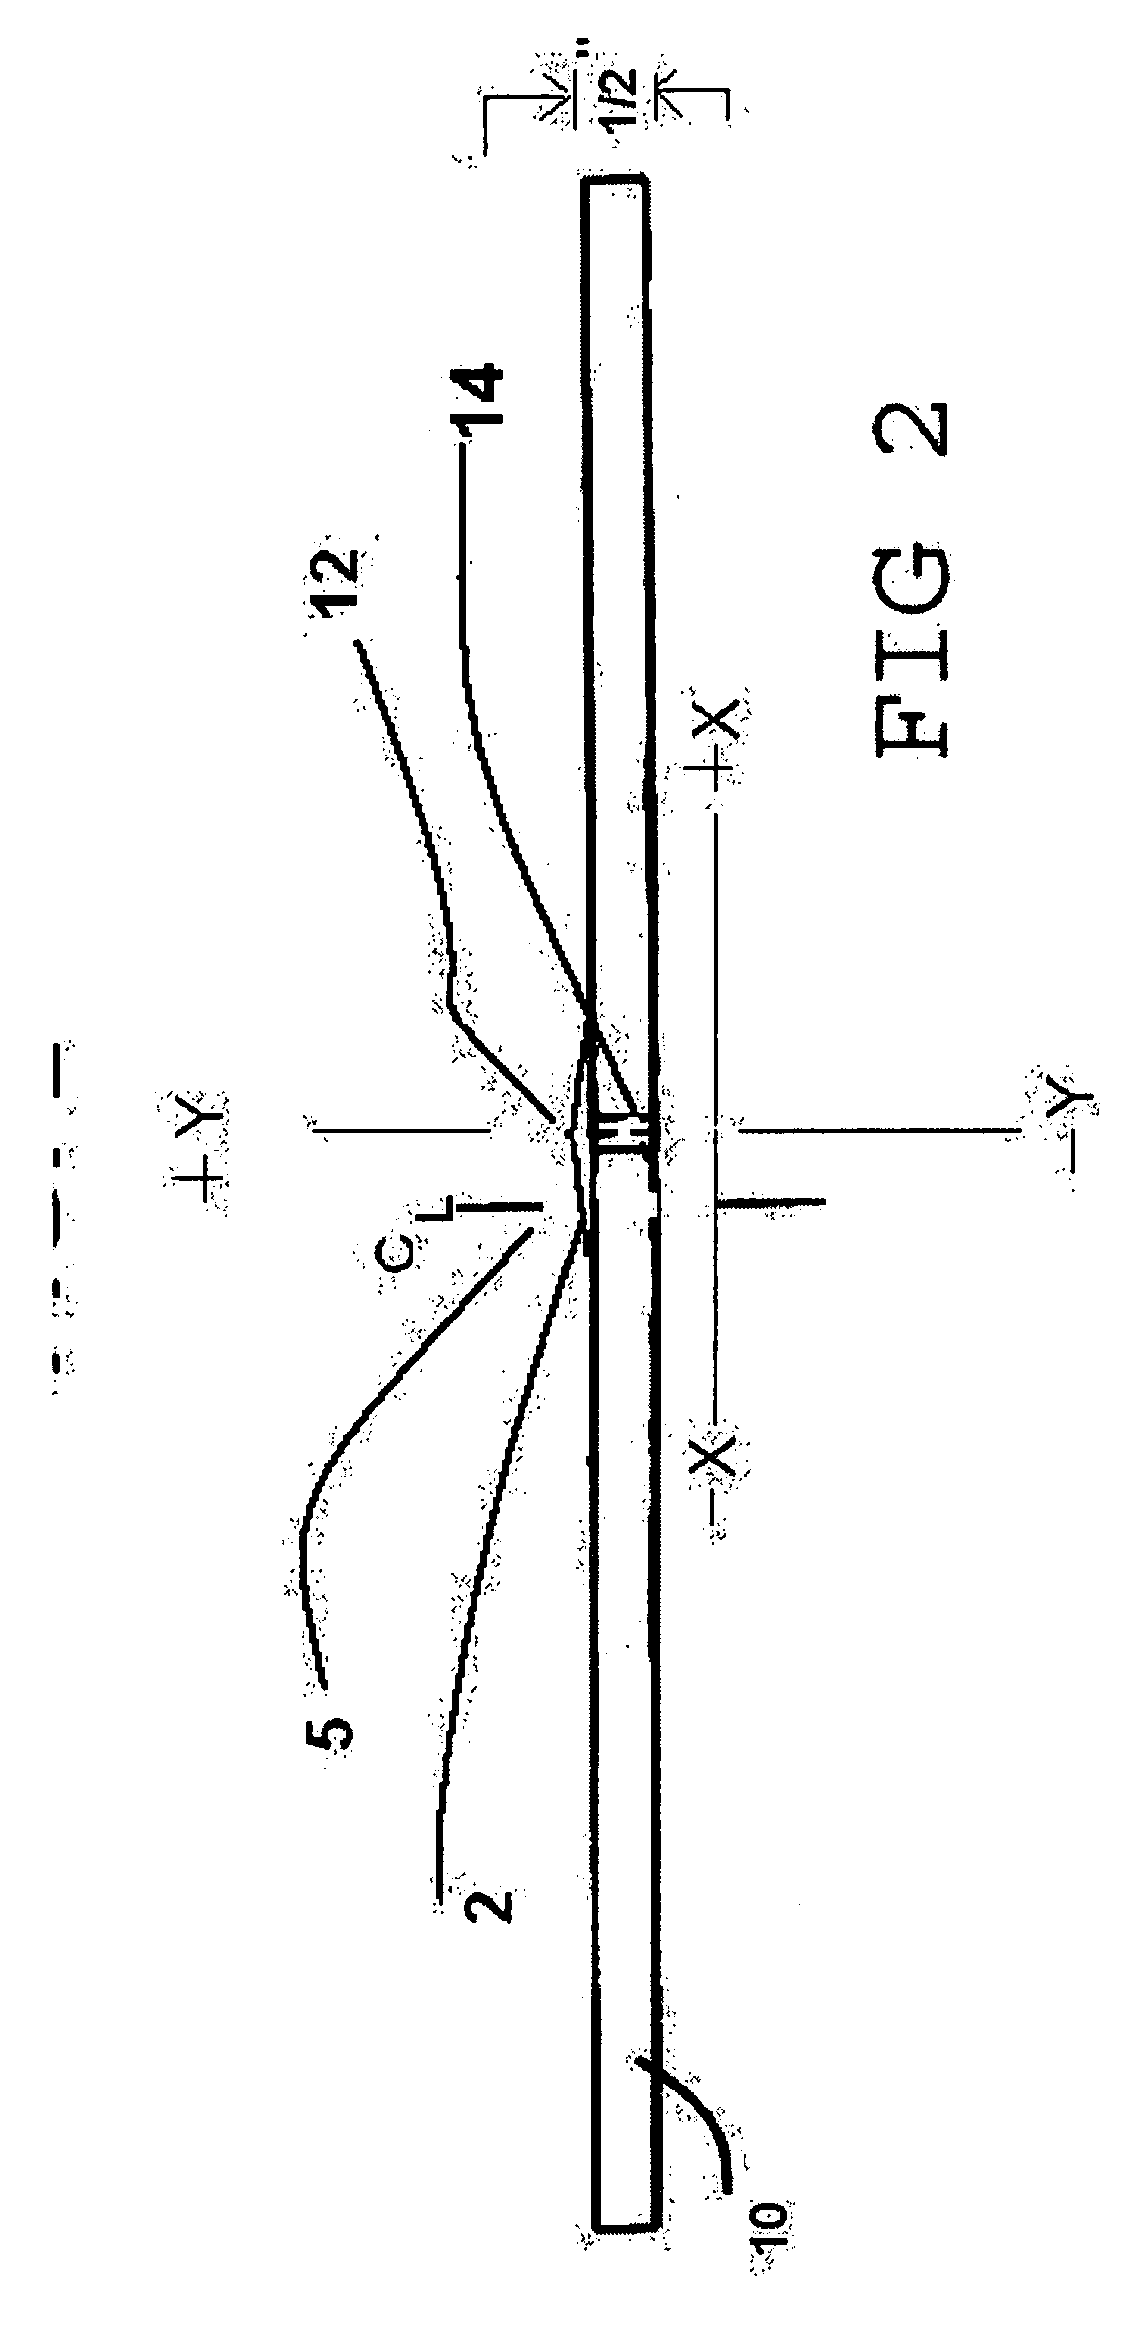 Insulation barrier for high voltage power lines and method of installation of same